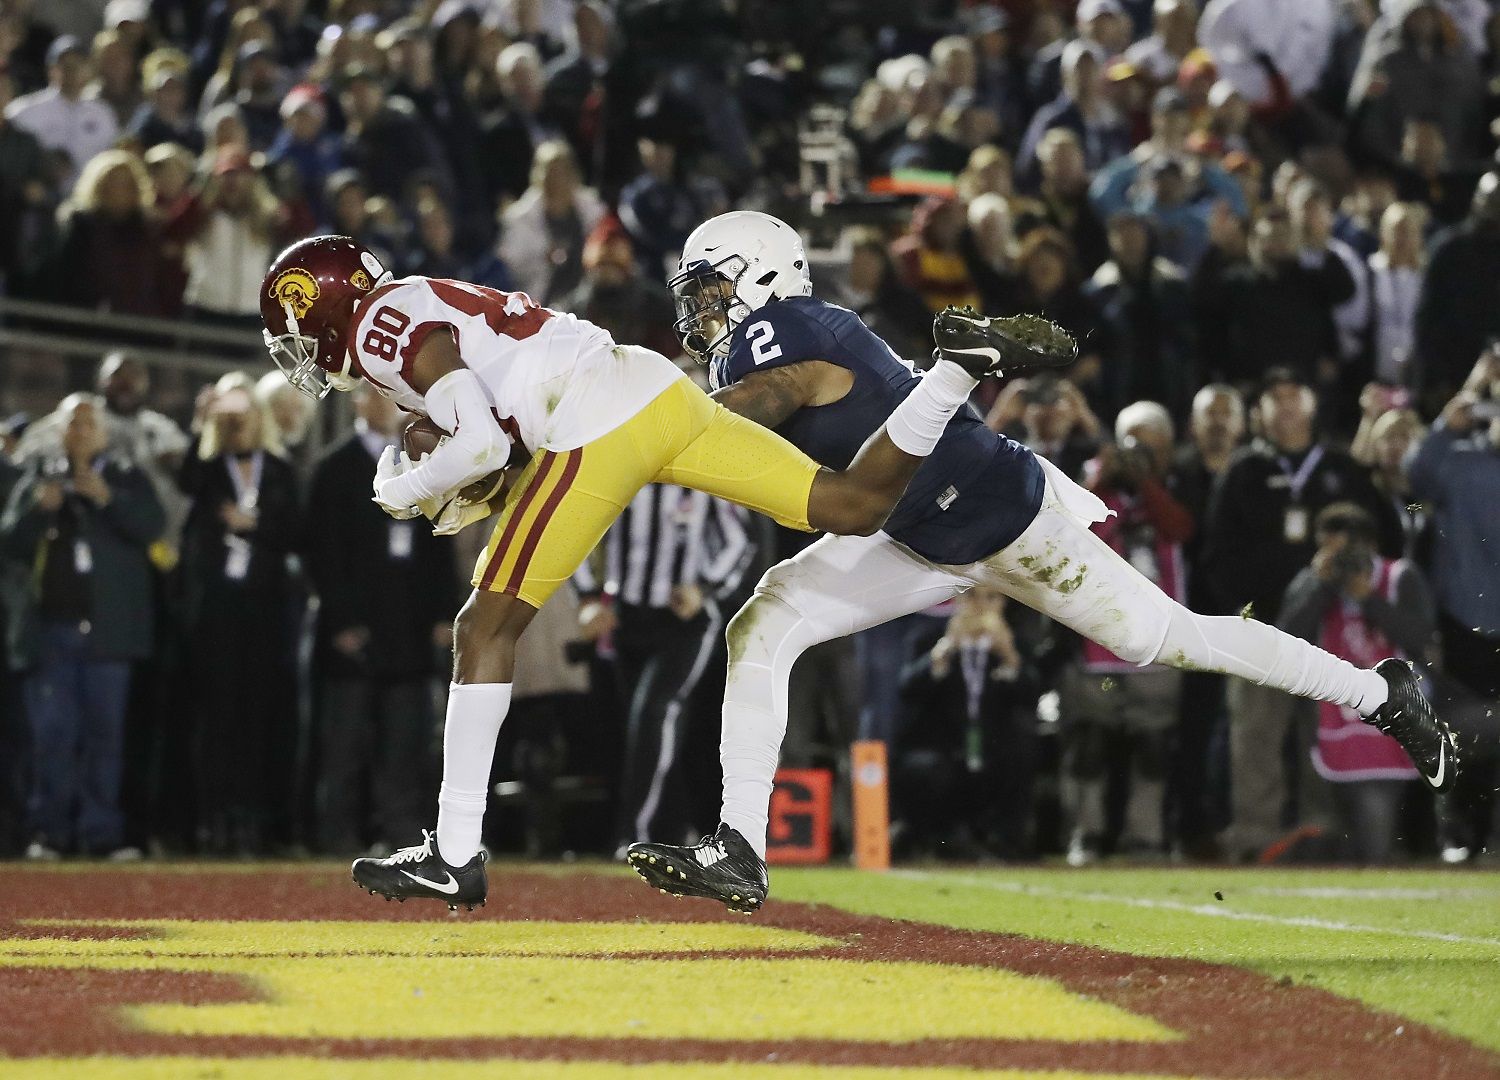 USC Trojans wide receiver Deontay Burnett (80) catches a game-tying touchdown pass over Penn State Nittany Lions safety Marcus Allen (2) during the Rose Bowl NCAA college football game, Monday, Jan. 2, 2017 in Pasadena, Calif. USC defeated Penn State 52-49 on a last second field goal. (AP Photo/Doug Benc)